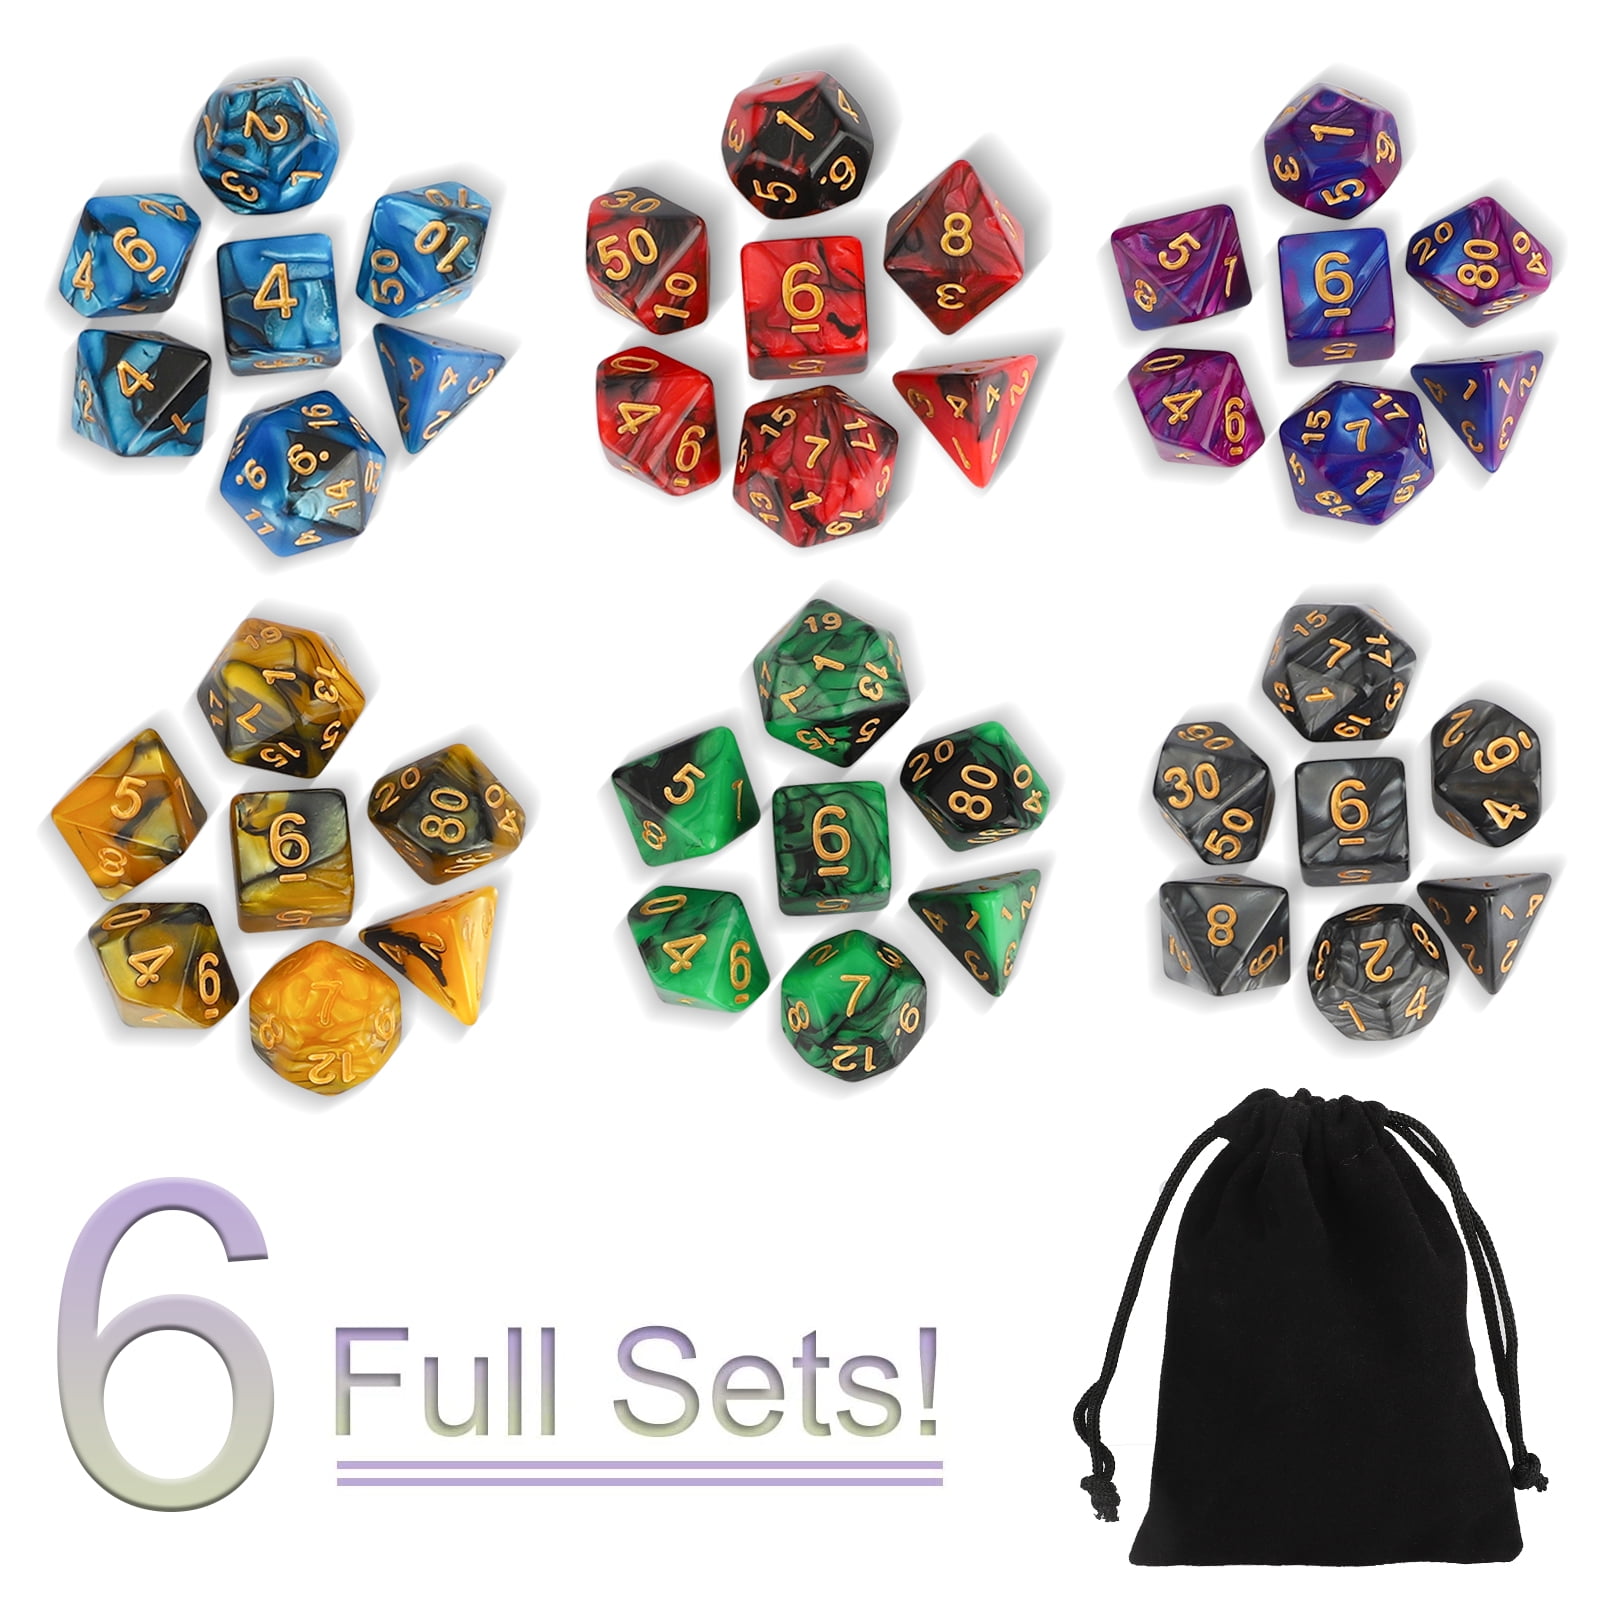 42 Polyhedral Dice with Bag RPG D&D Pathfinder Includes 6 Complete Sets of 7 